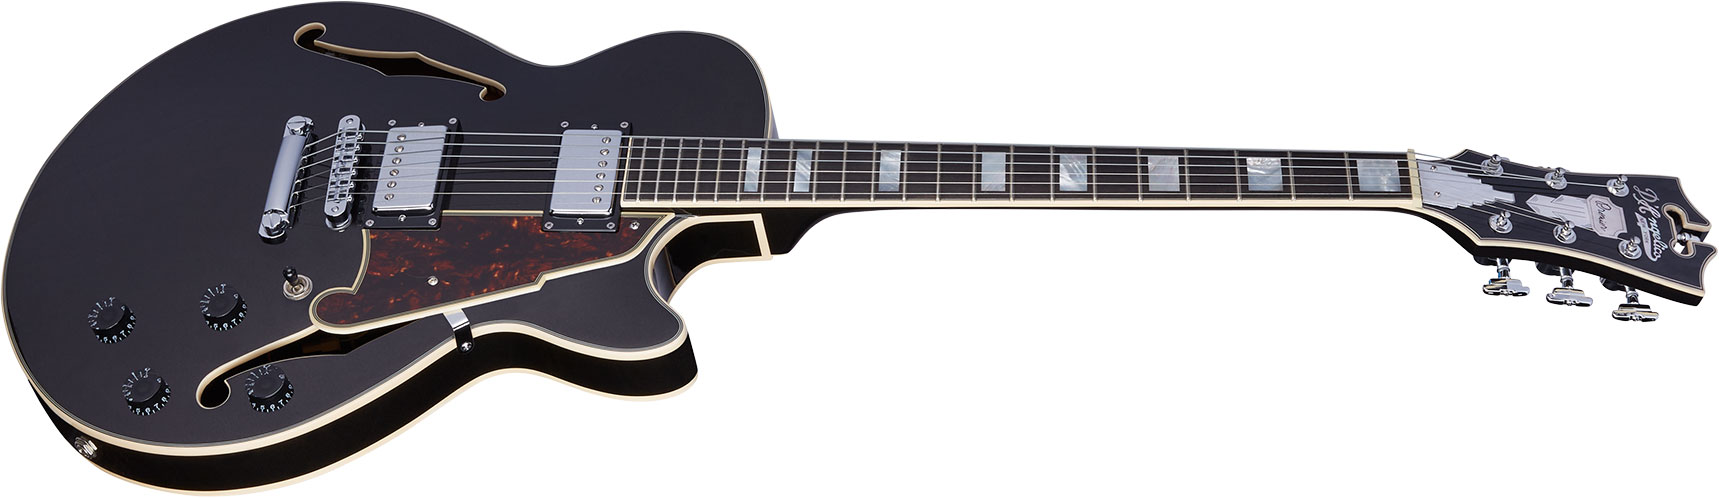 D'angelico Ss Premier 2h Ht Ova - Black Flake - Semi-hollow electric guitar - Variation 1